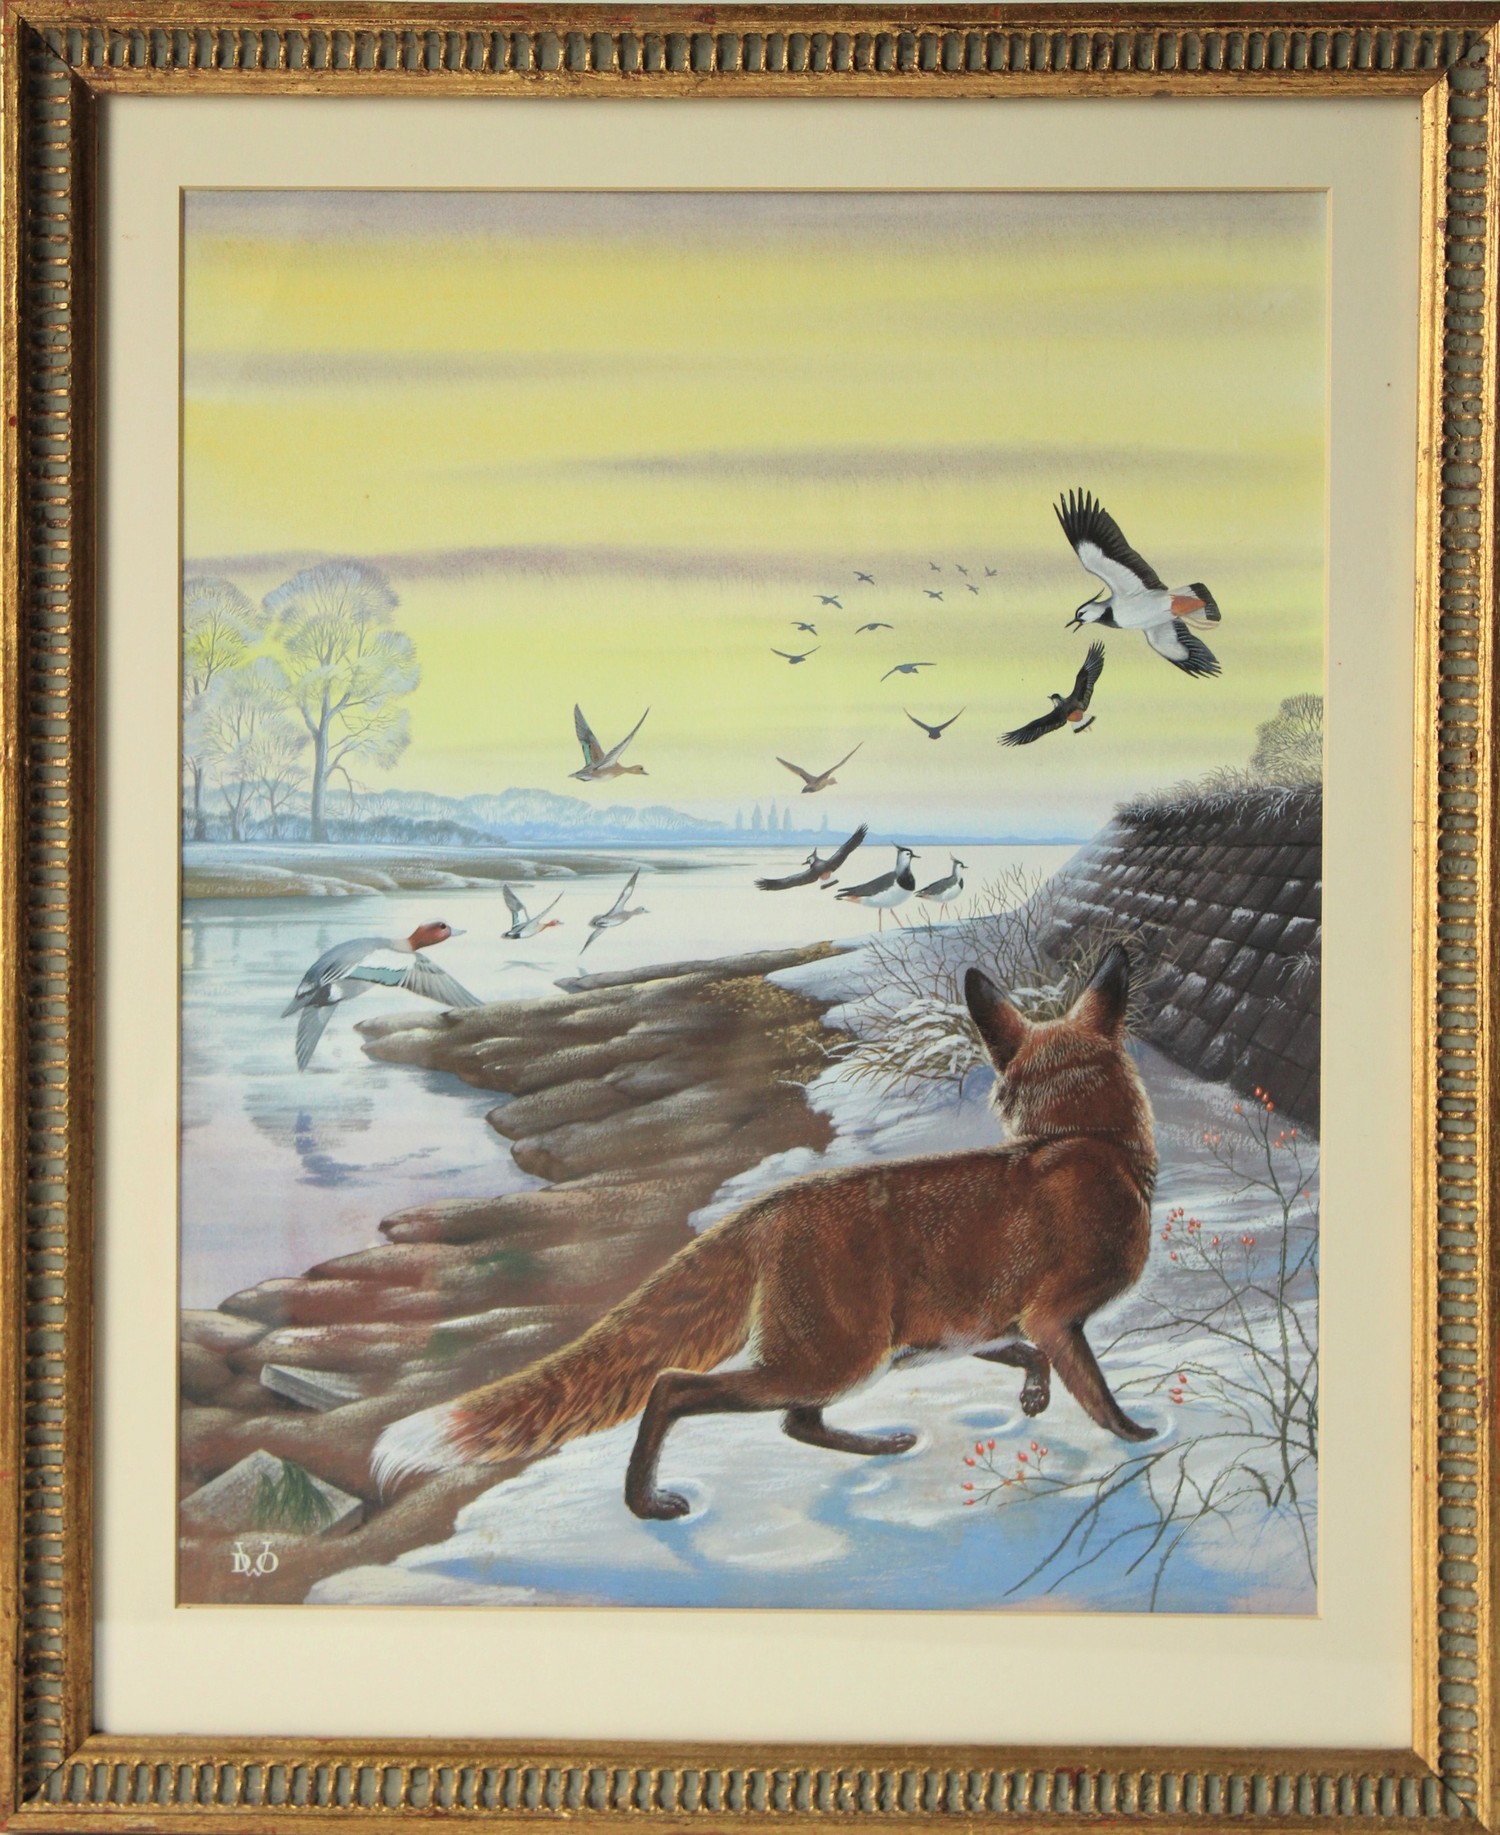 Denys Ovenden (1922-2019) ‘Fox and Lapwings, in Winter’ signed with monogram ‘DWO’, watercolour